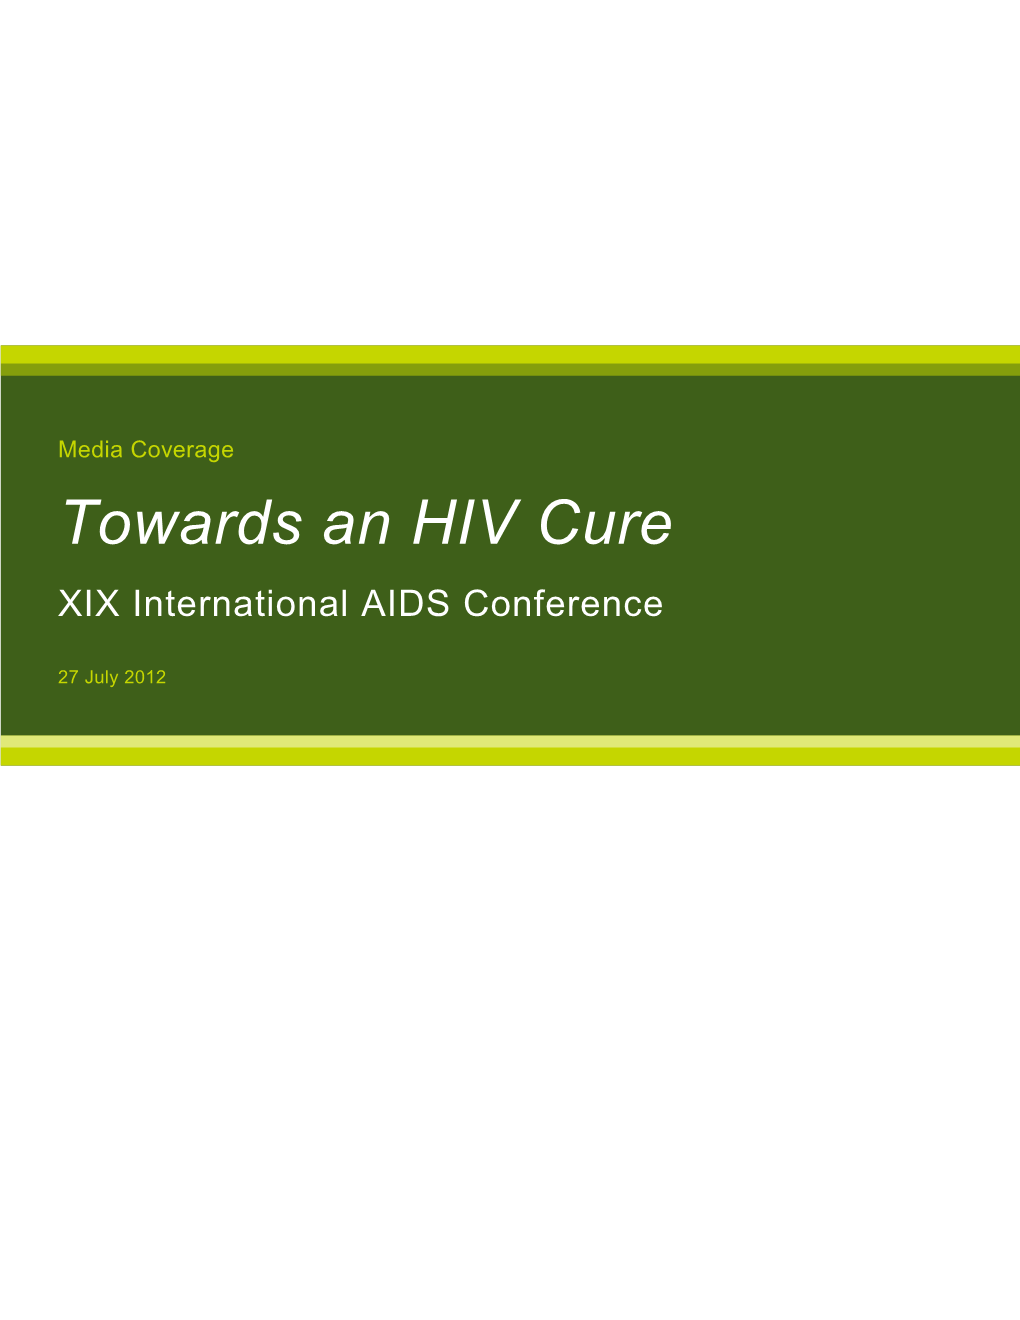 Towards an HIV Cure XIX International AIDS Conference